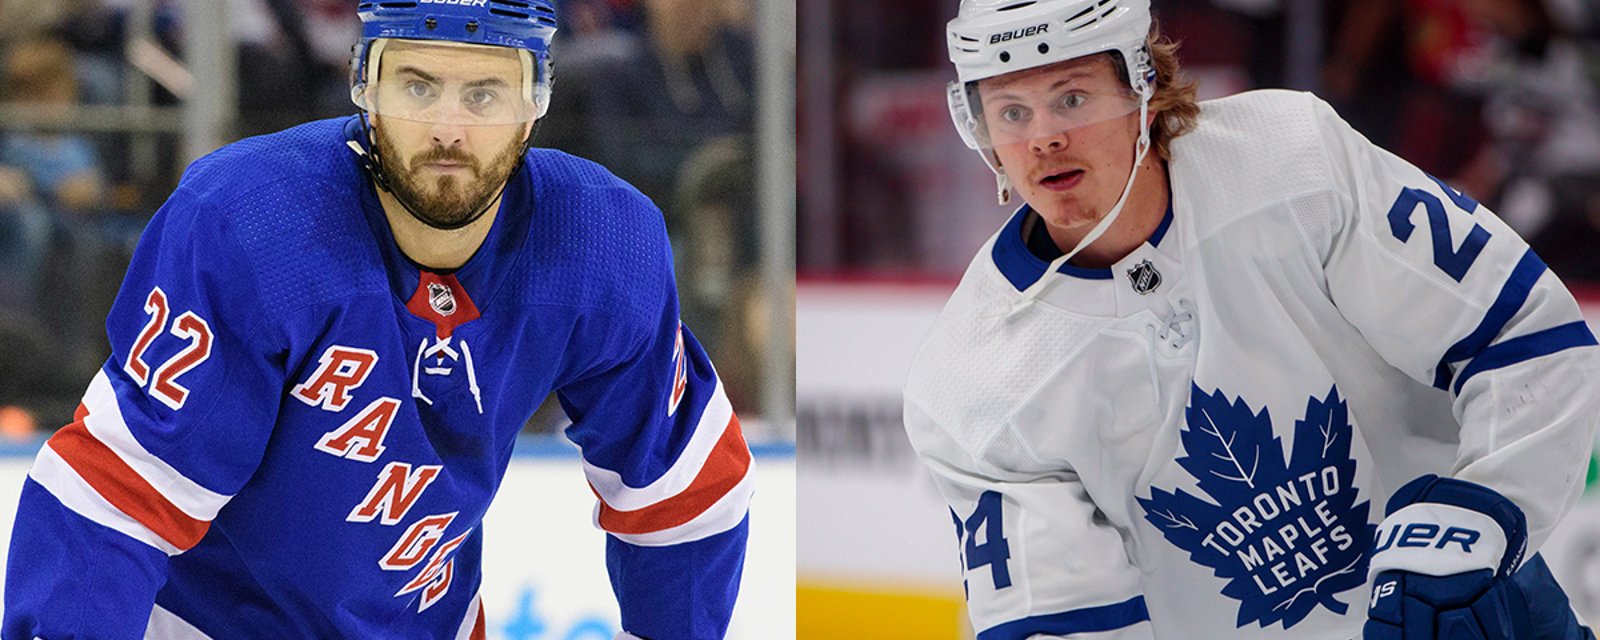 Report: More names leaked from Leafs/Rangers trade talks